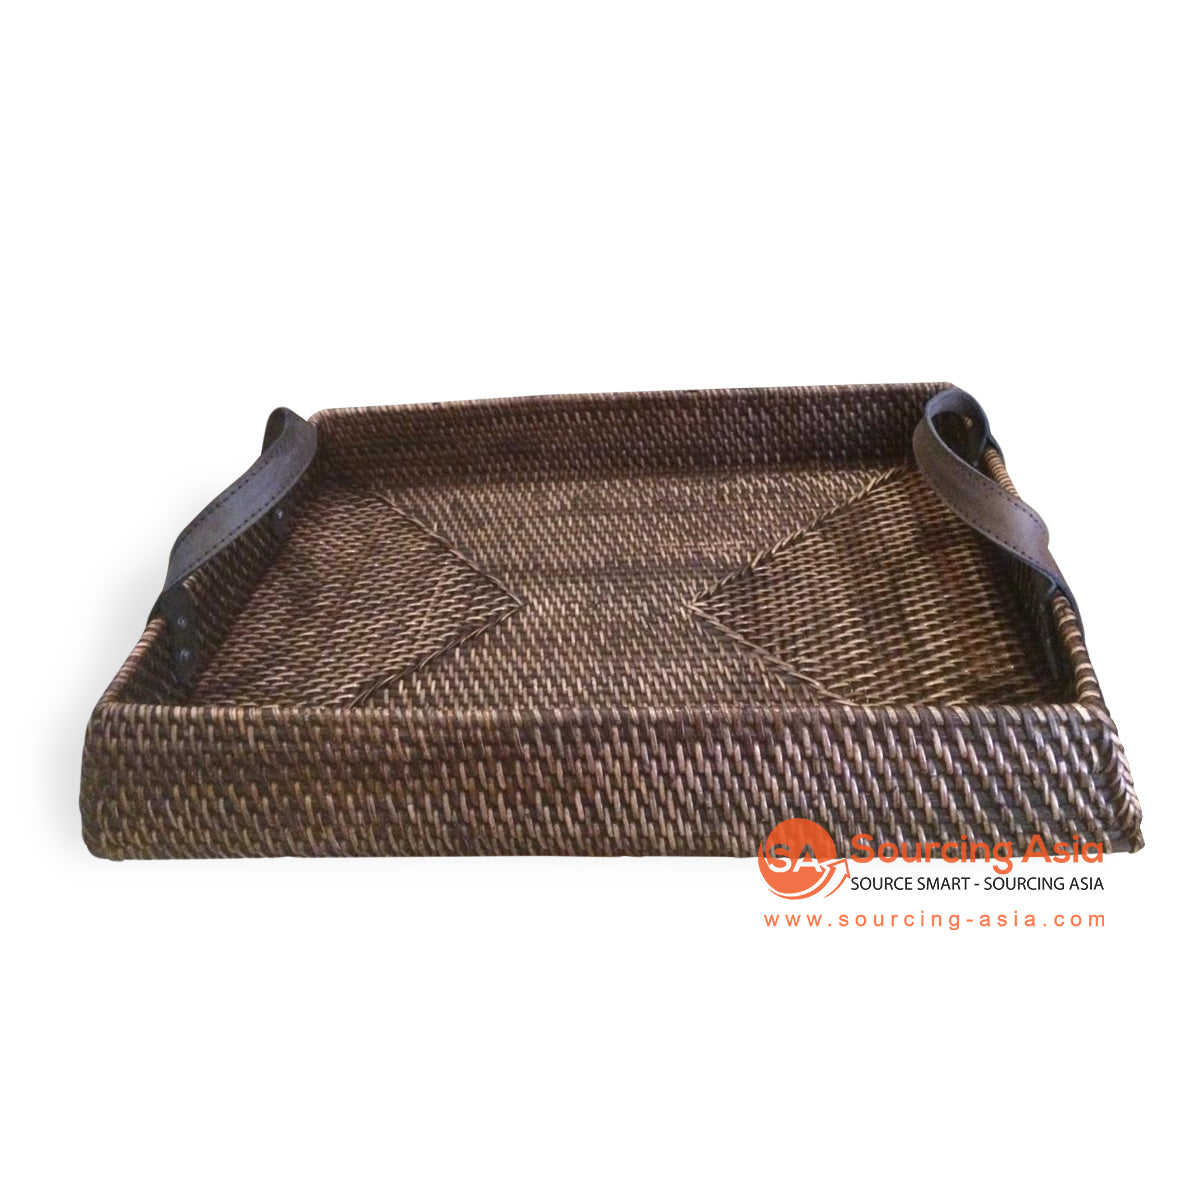 MTI112 DARK BROWN WOVEN RATTAN RECTANGLE TRAY WITH LEATHER HANDLE